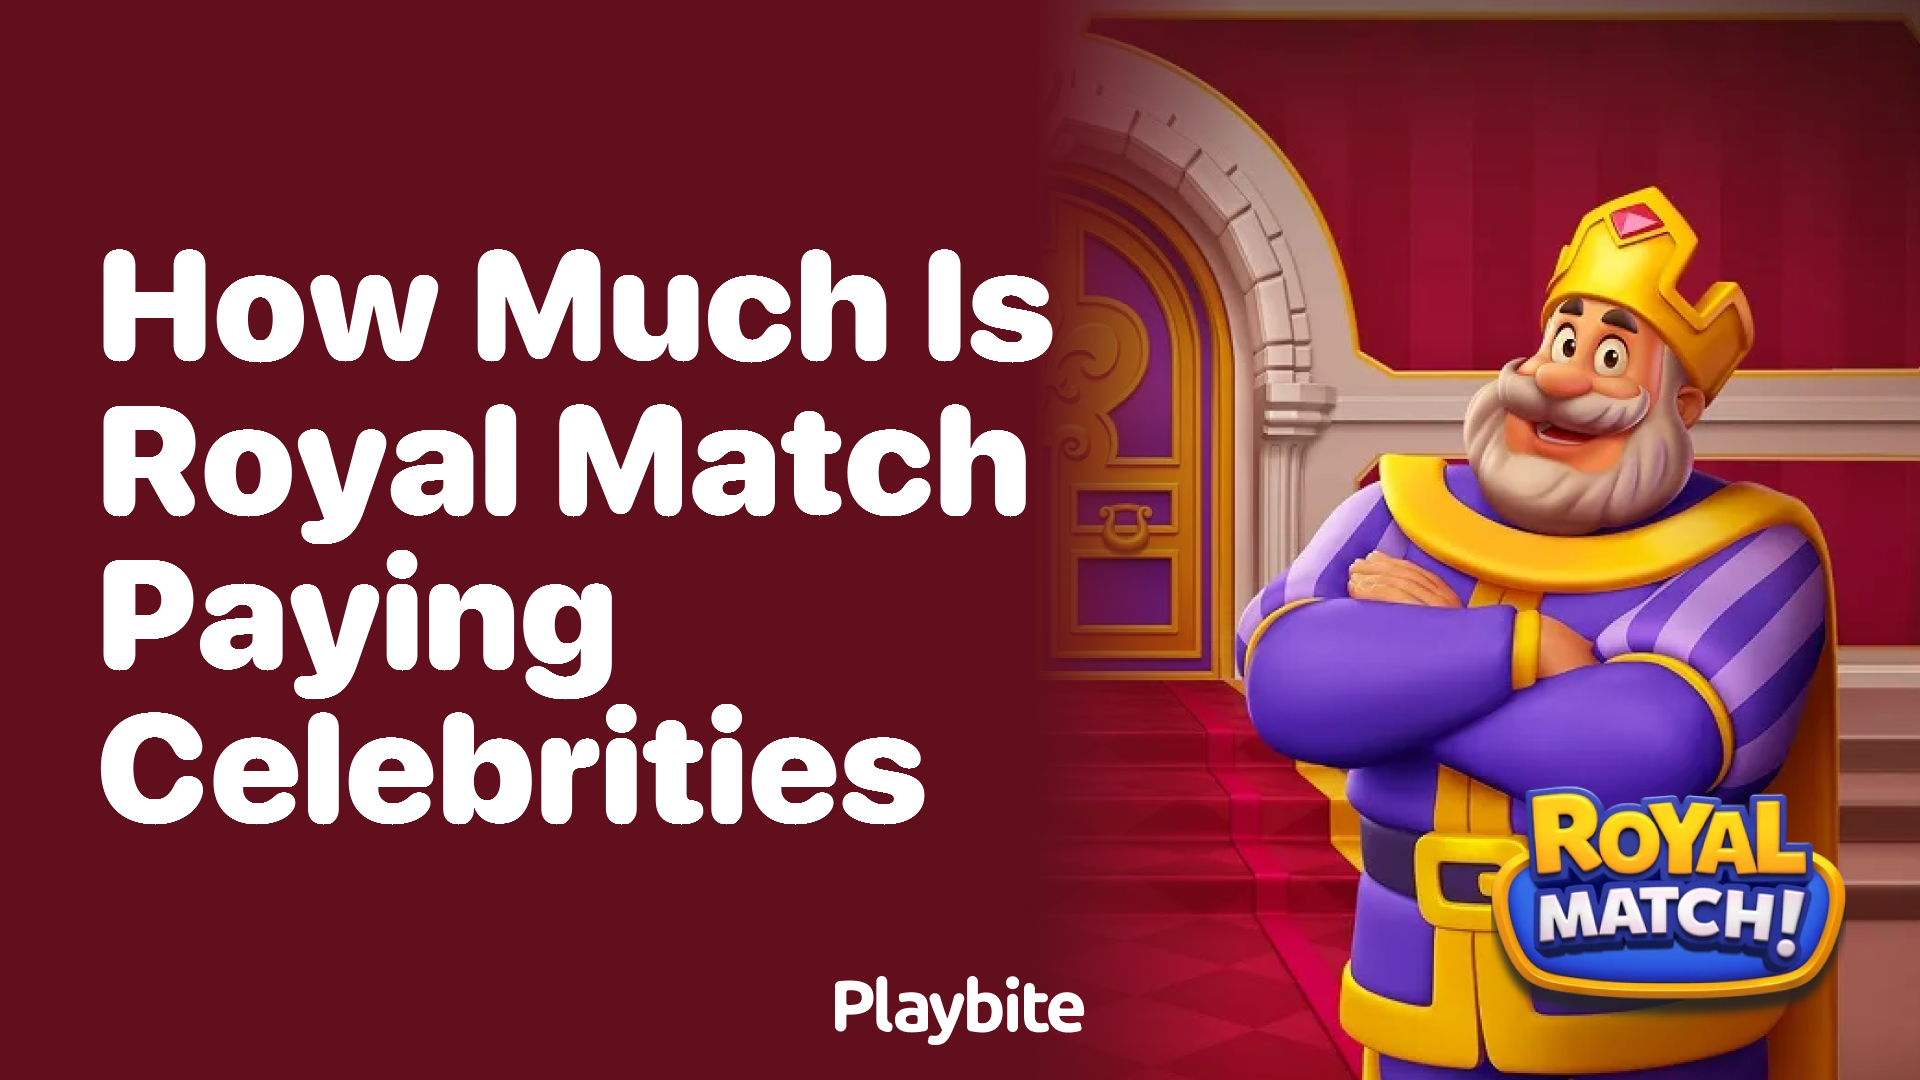 How Much is Royal Match Paying Celebrities?